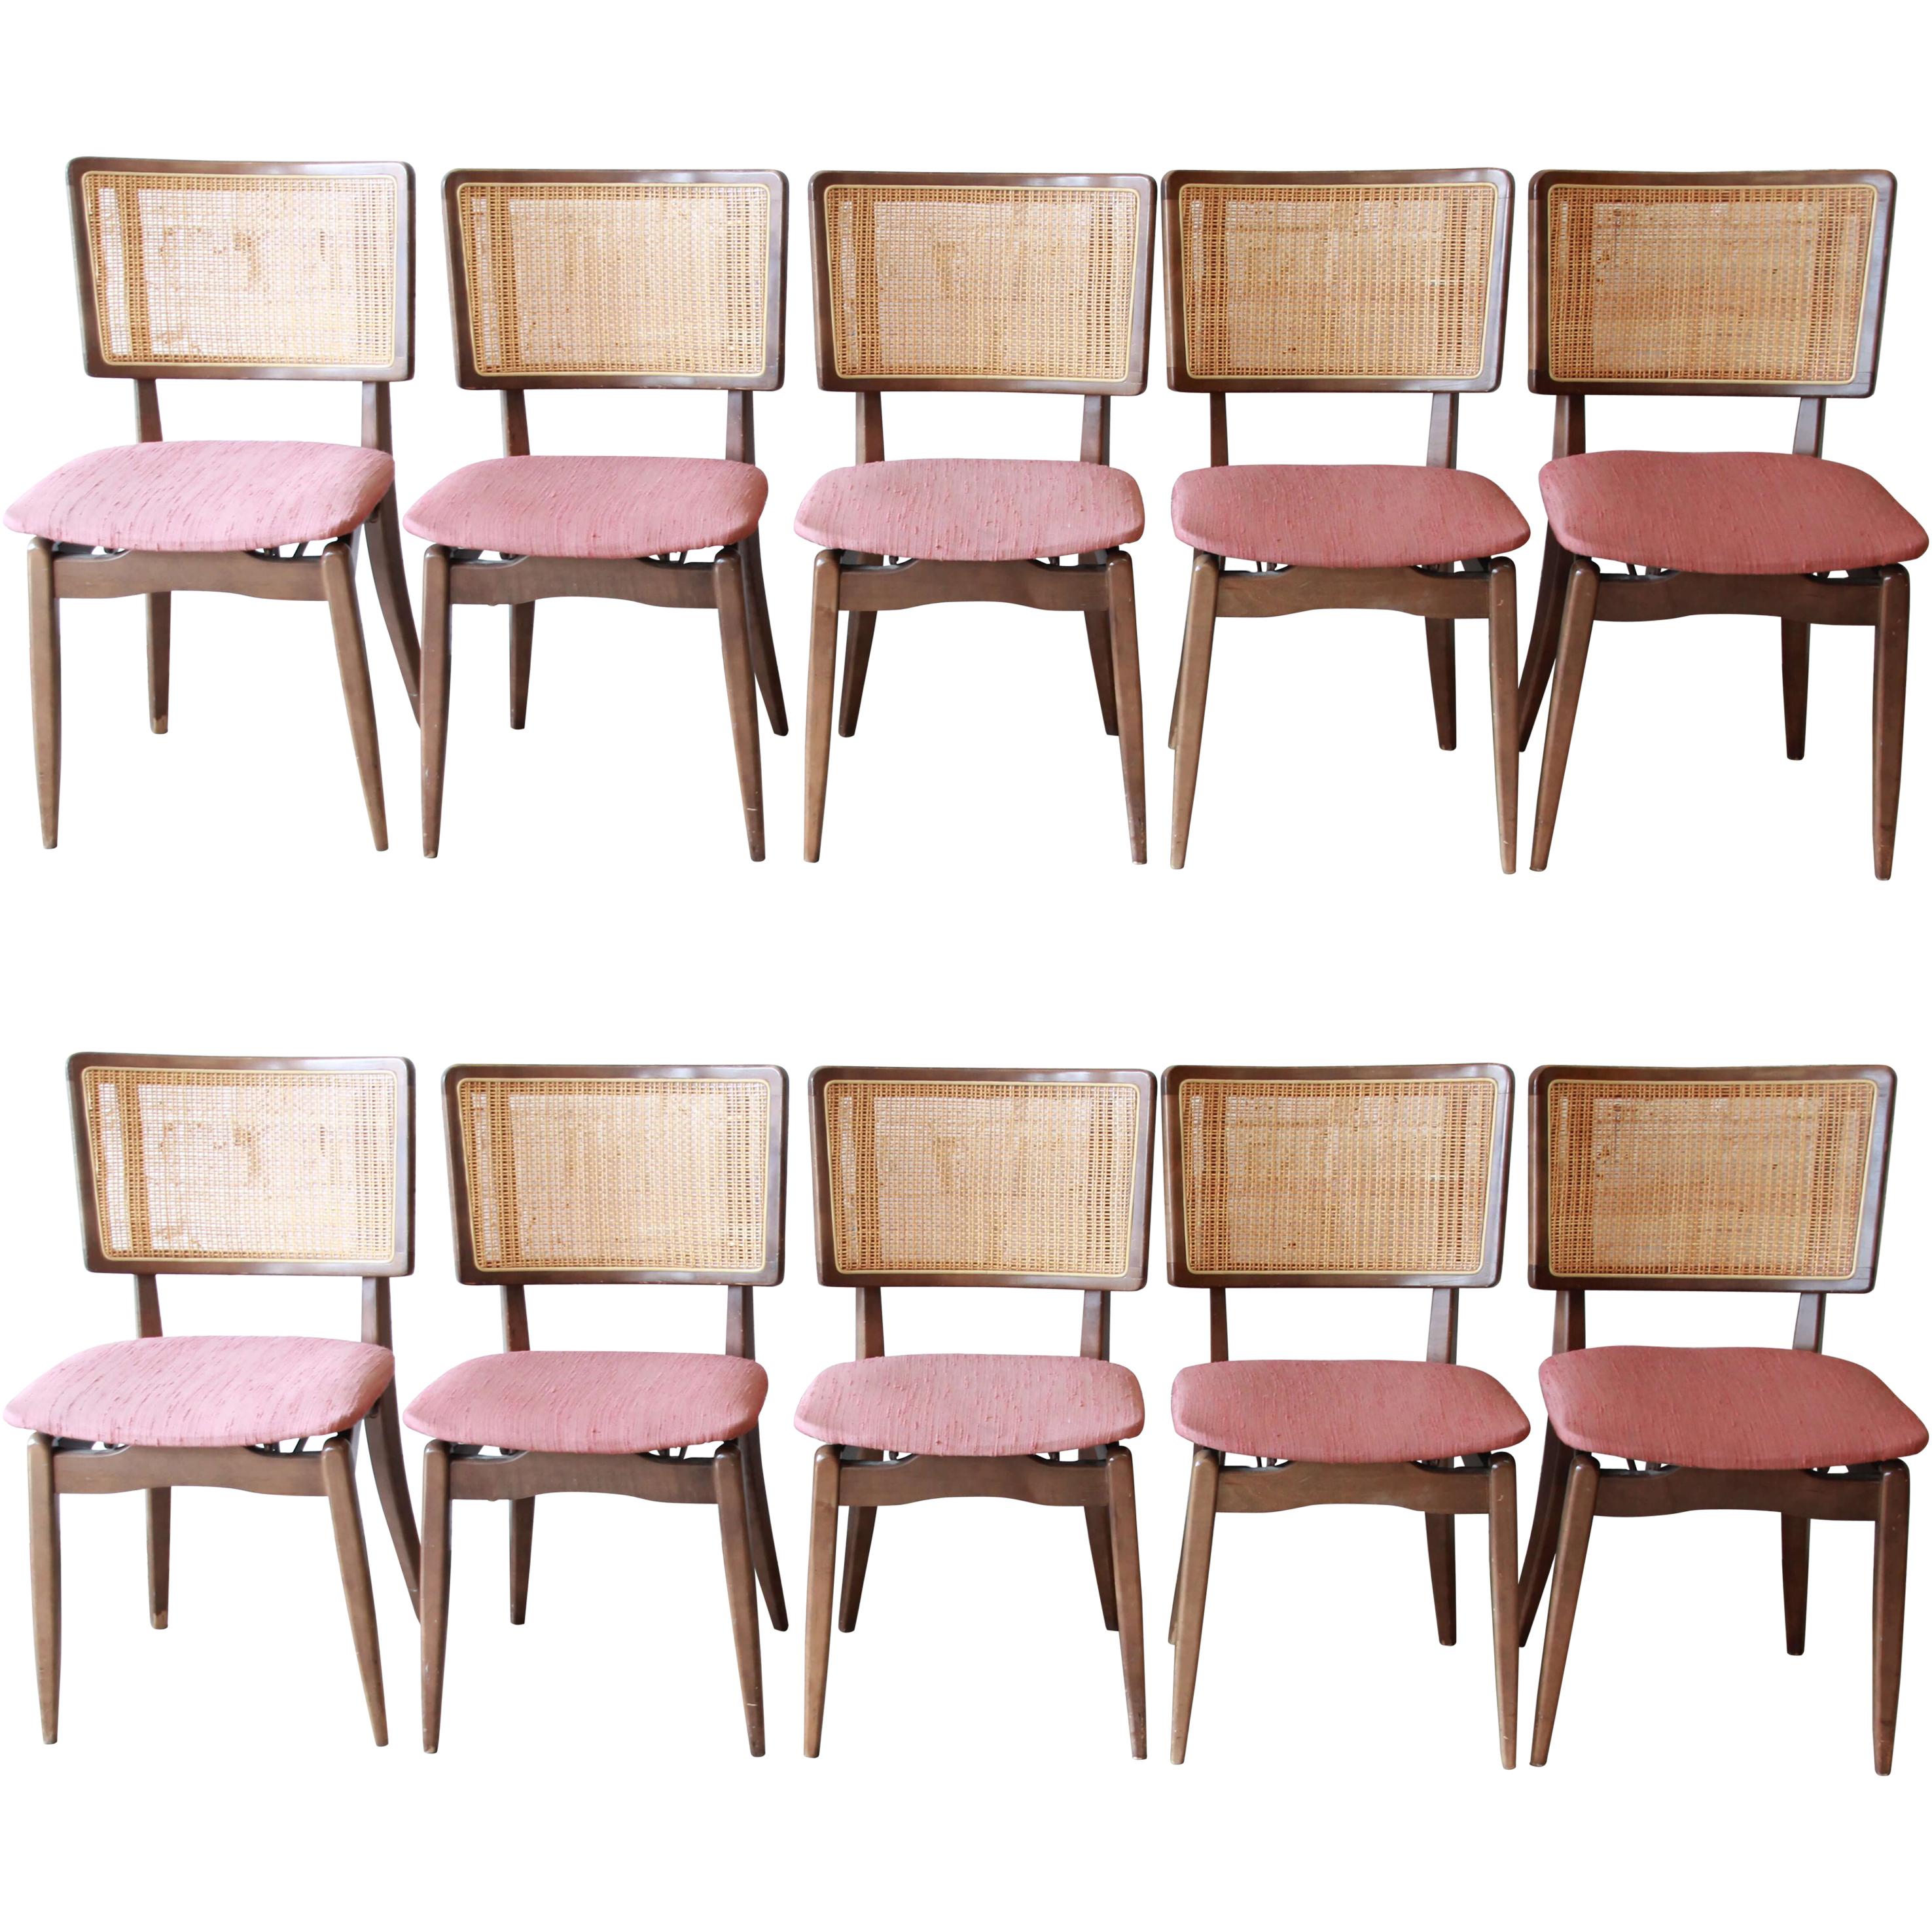 Mid-Century Modern Stakmore Folding Chairs, Set of Ten